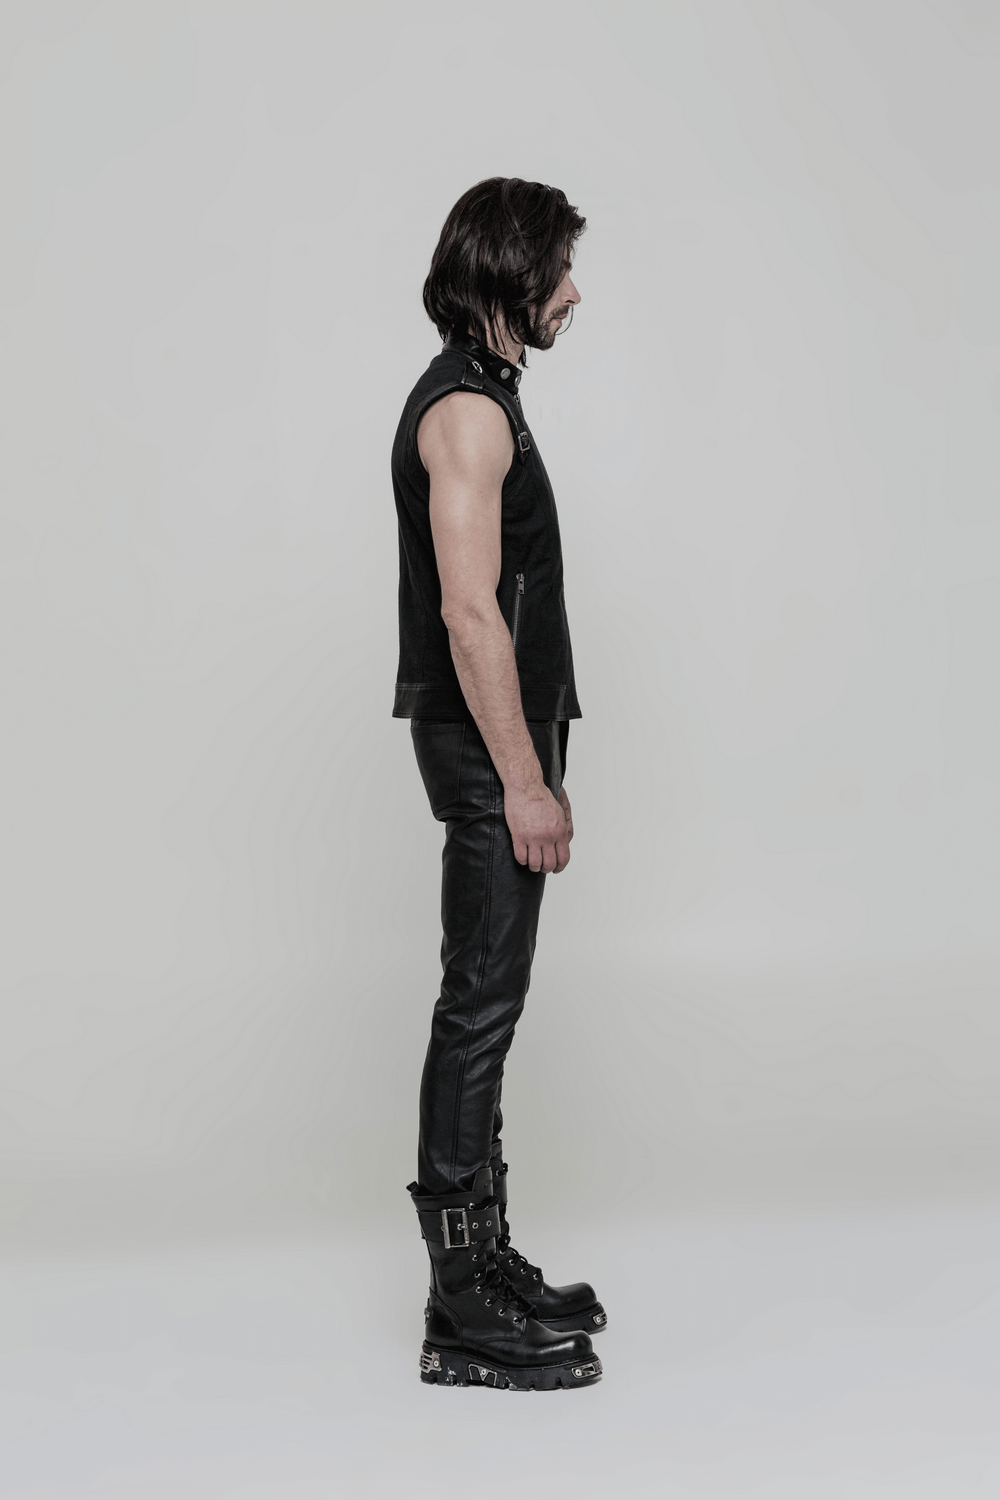 Edgy Punk PU Slim-Fit Fashion Trousers for Men